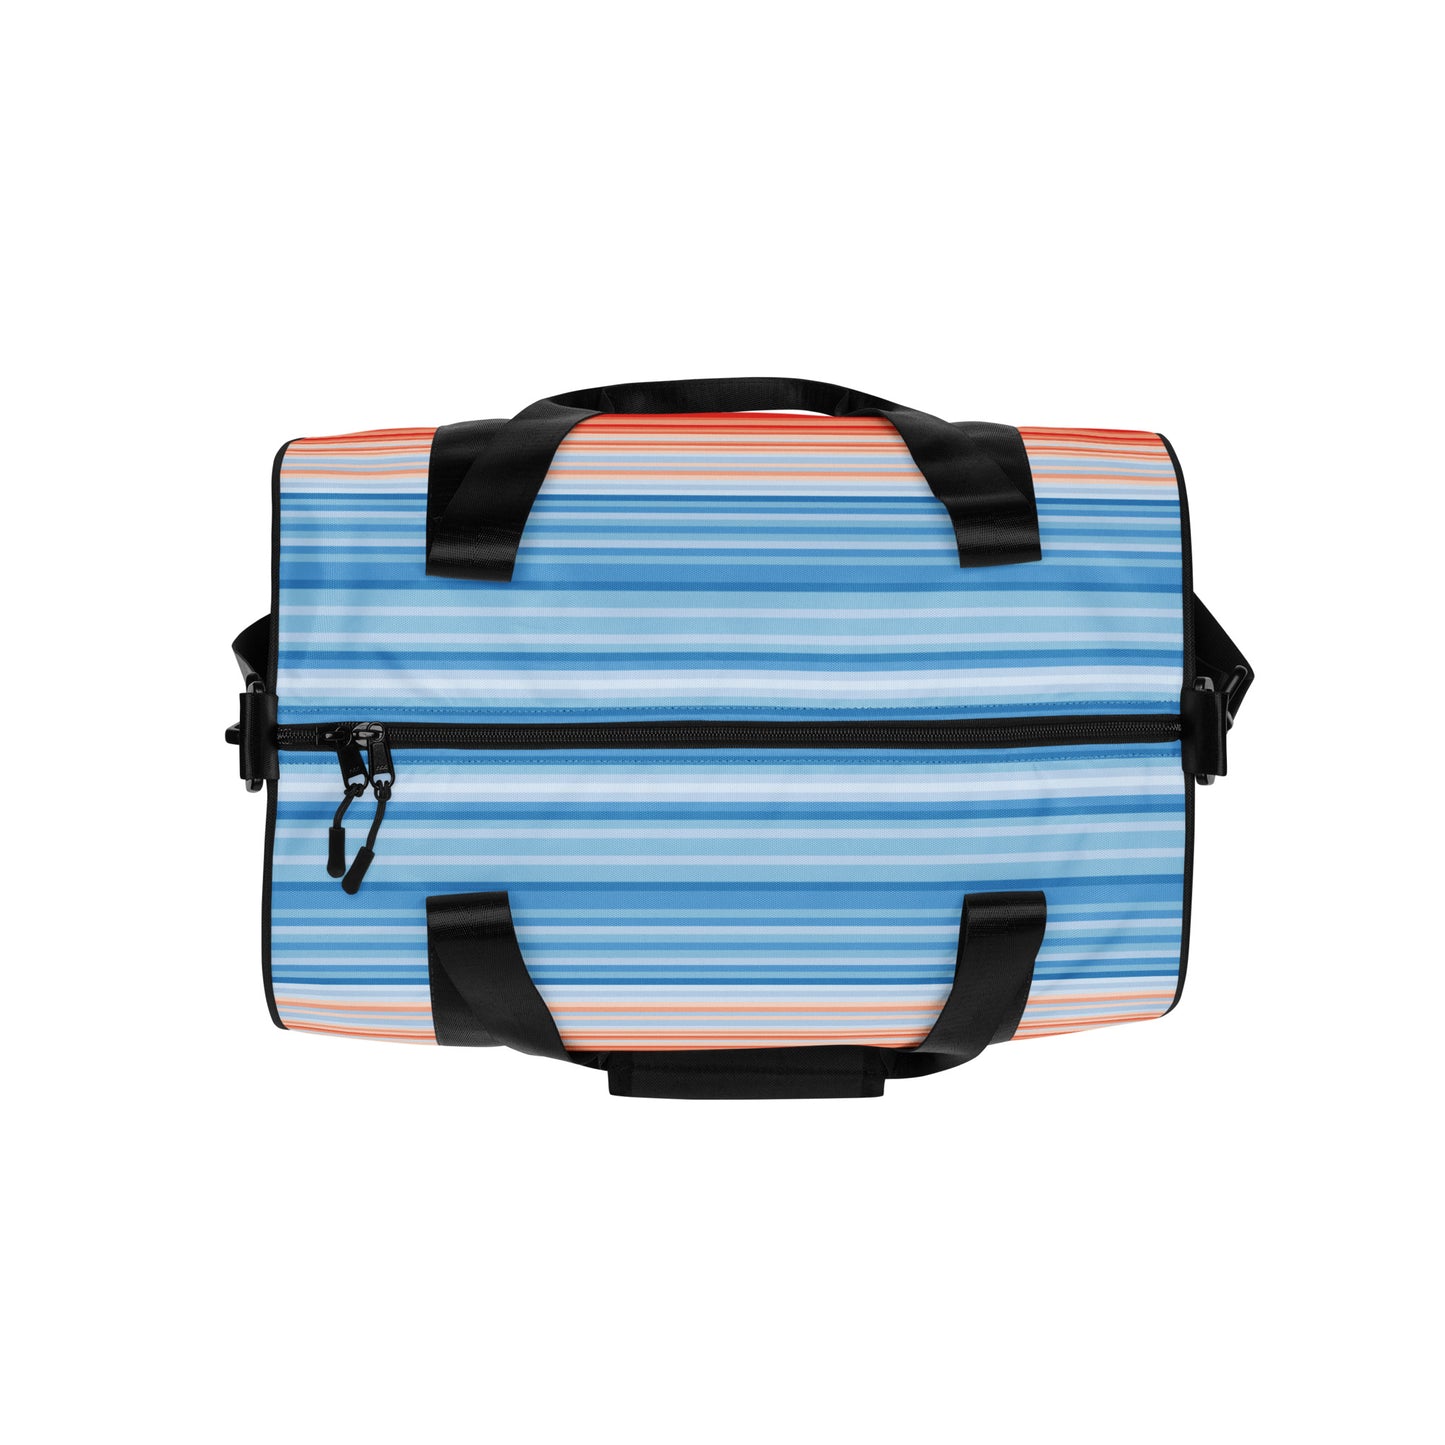 Climate Change Global Warming Stripes - Sustainably Made gym bag